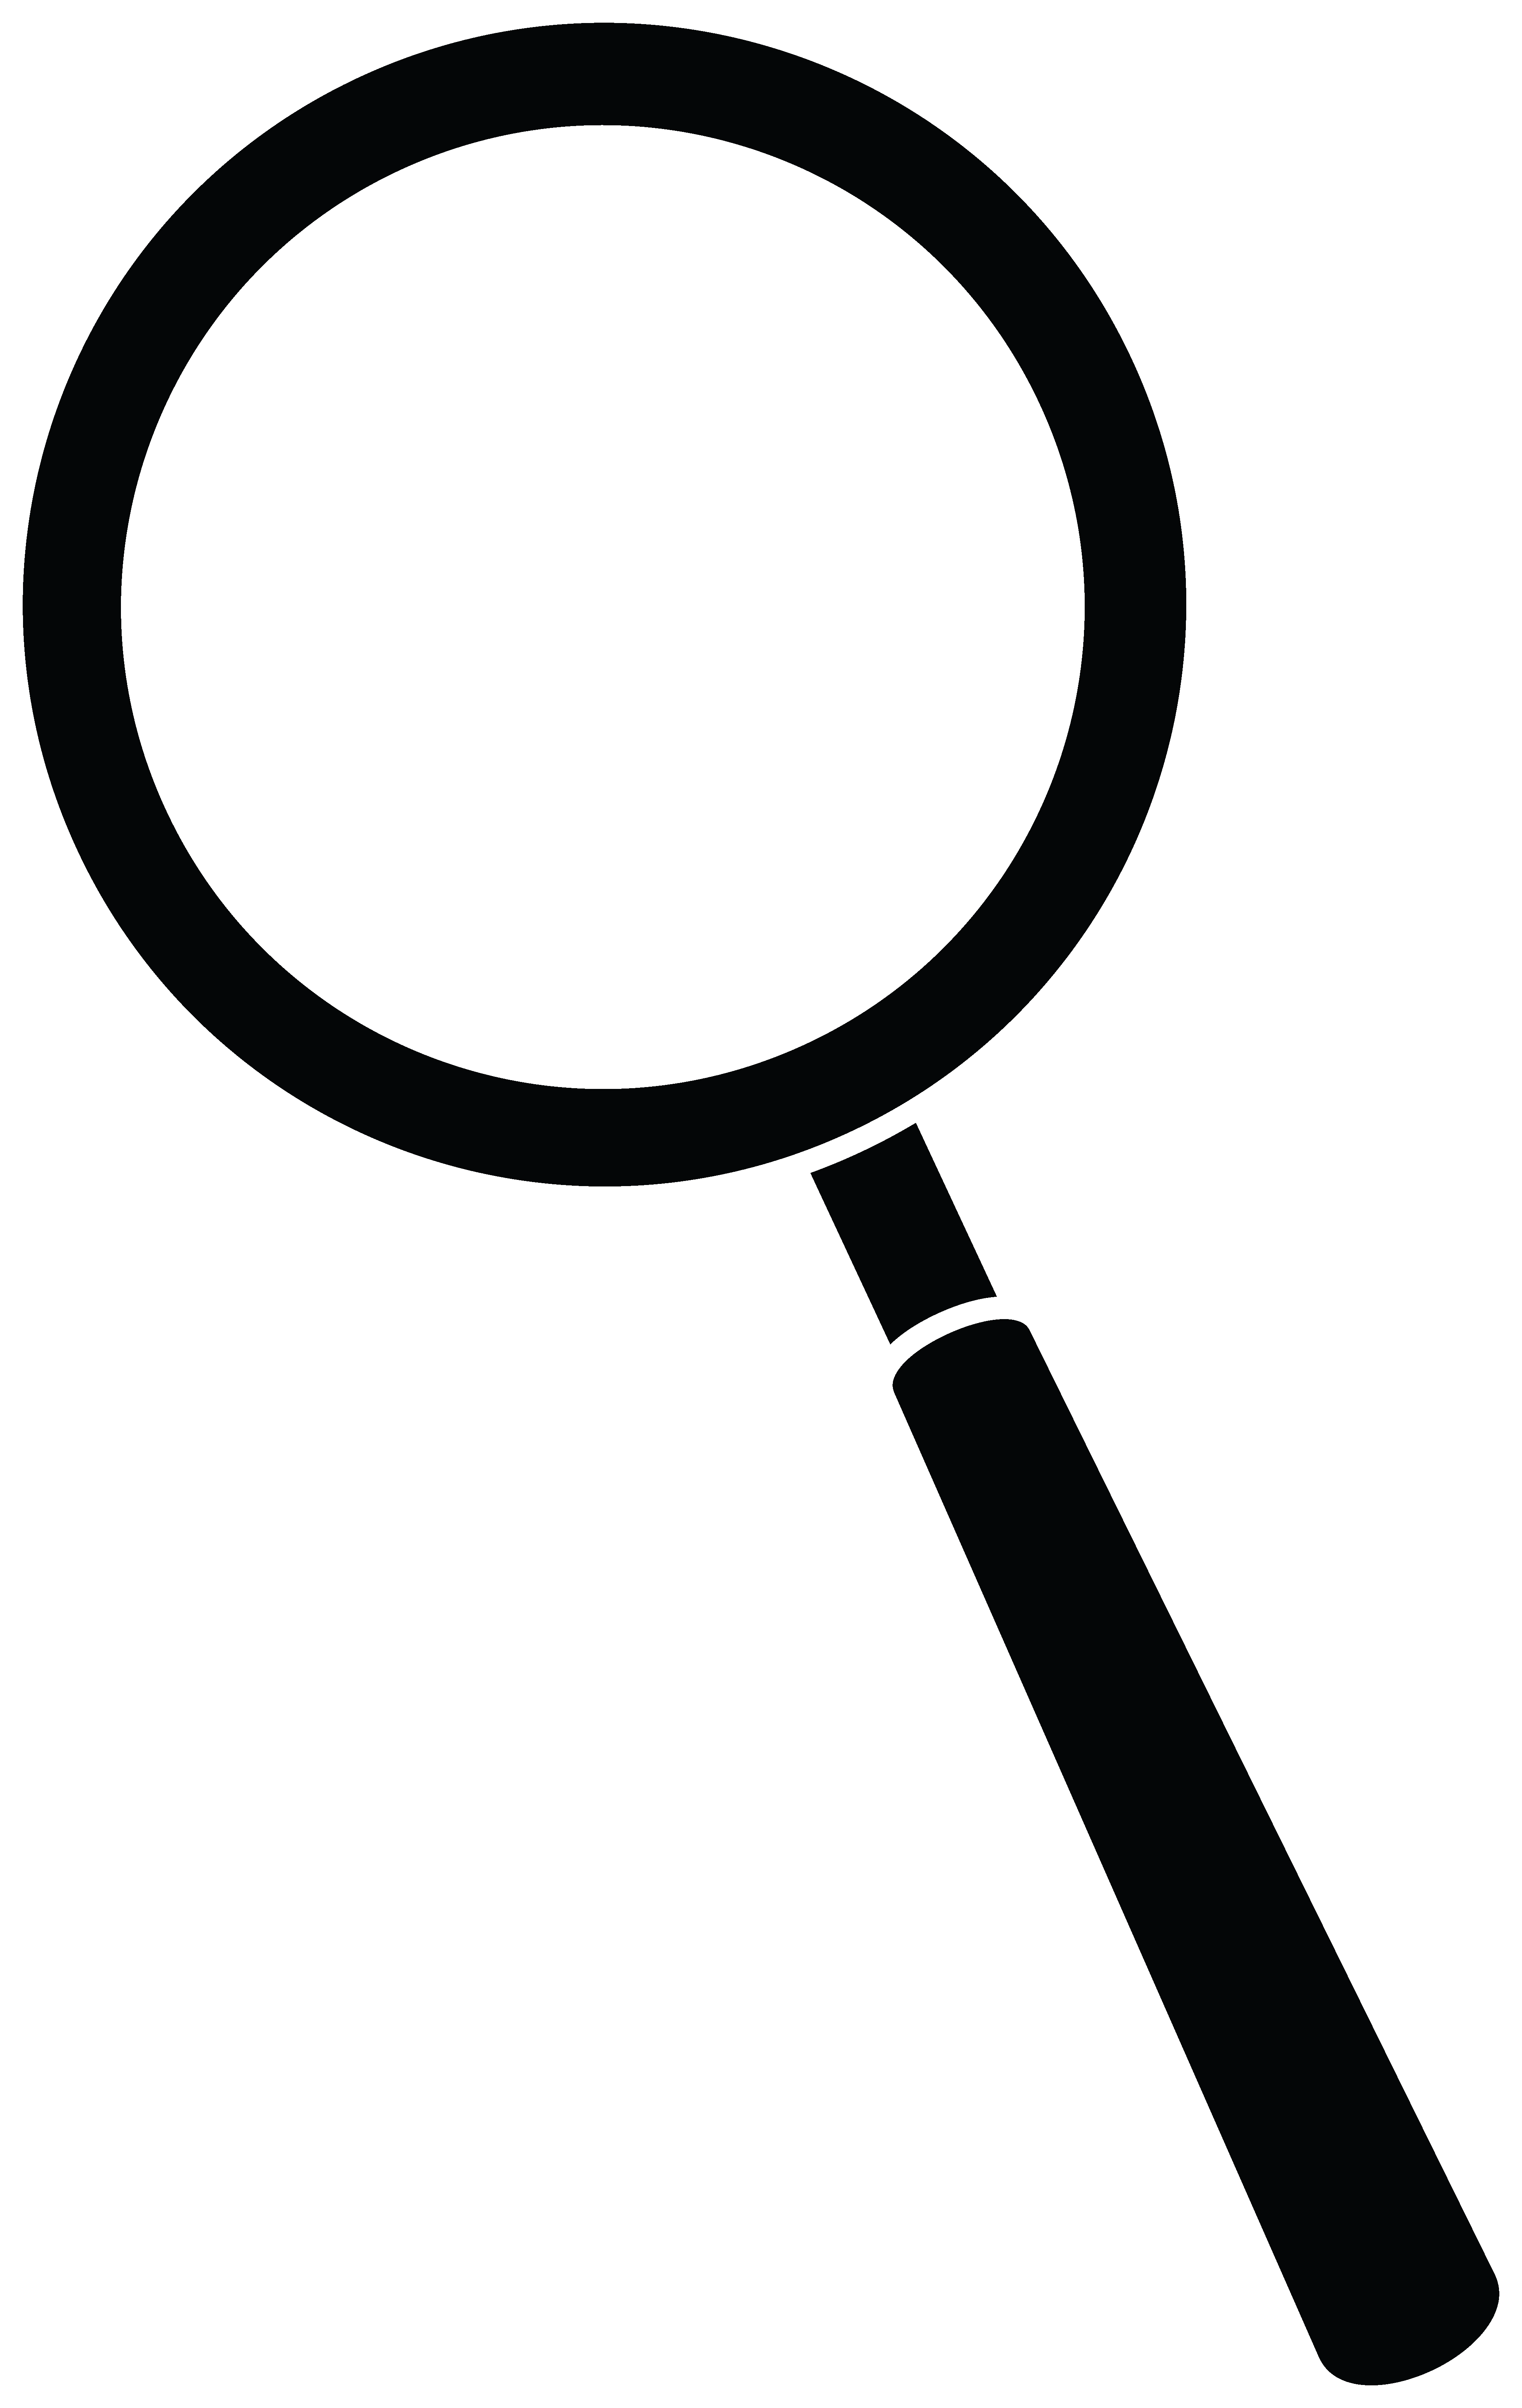 magnifying-glass-clipart- | Clipart library - Free Clipart Images